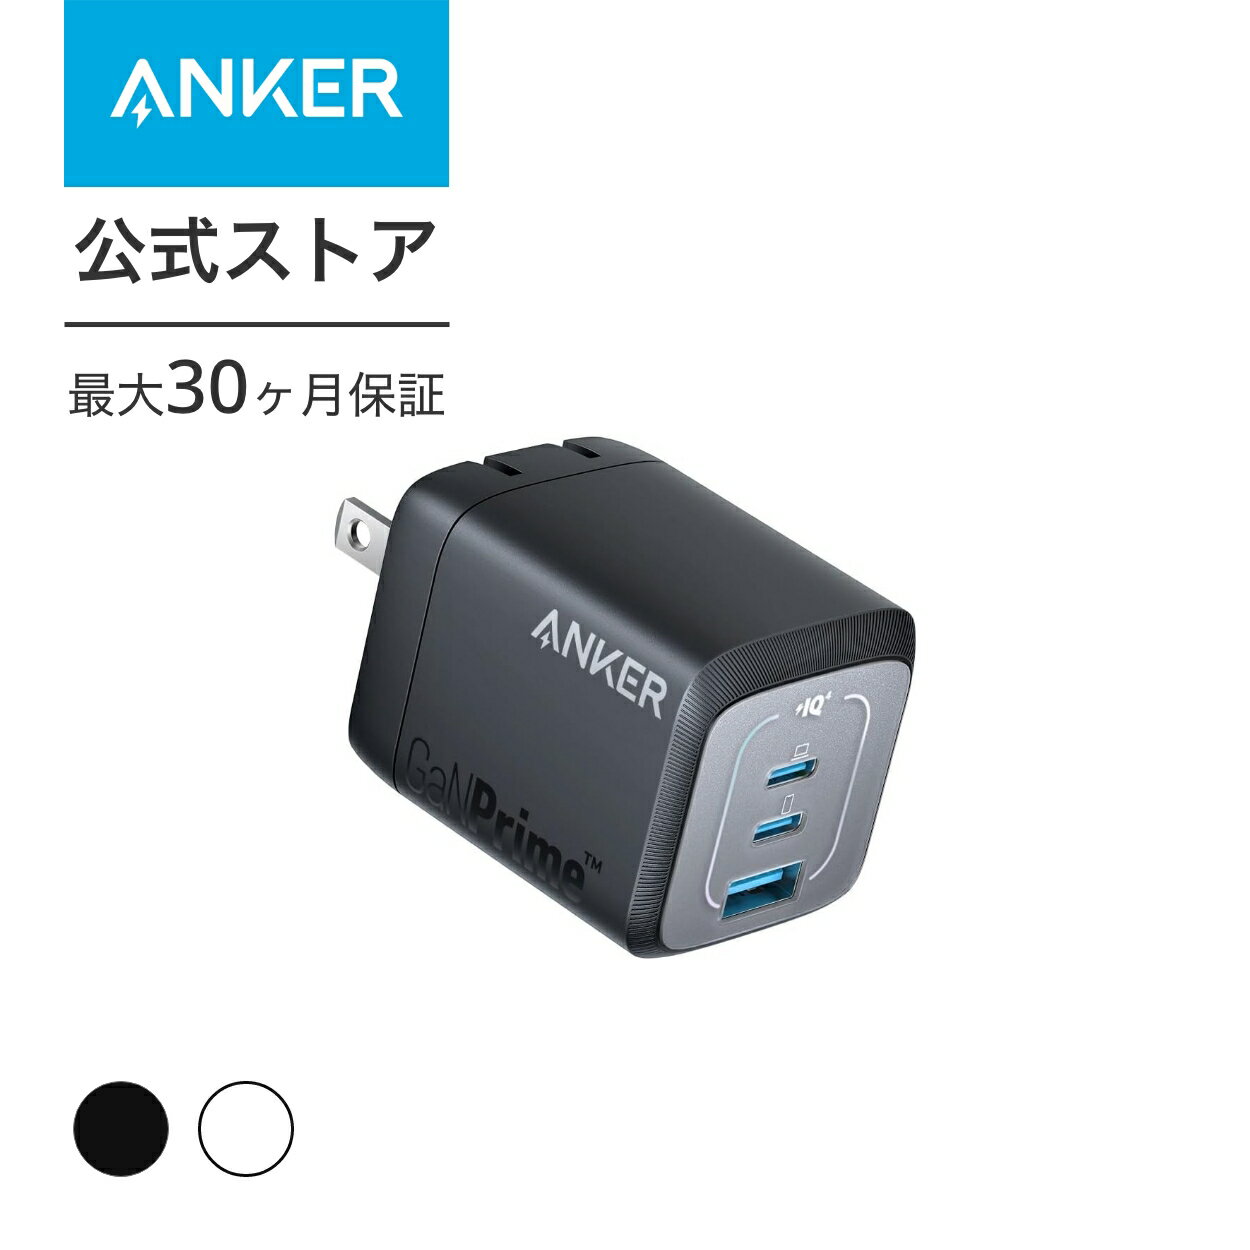 Anker Prime Wall Charger (67W, 3 ports, GaN) (US